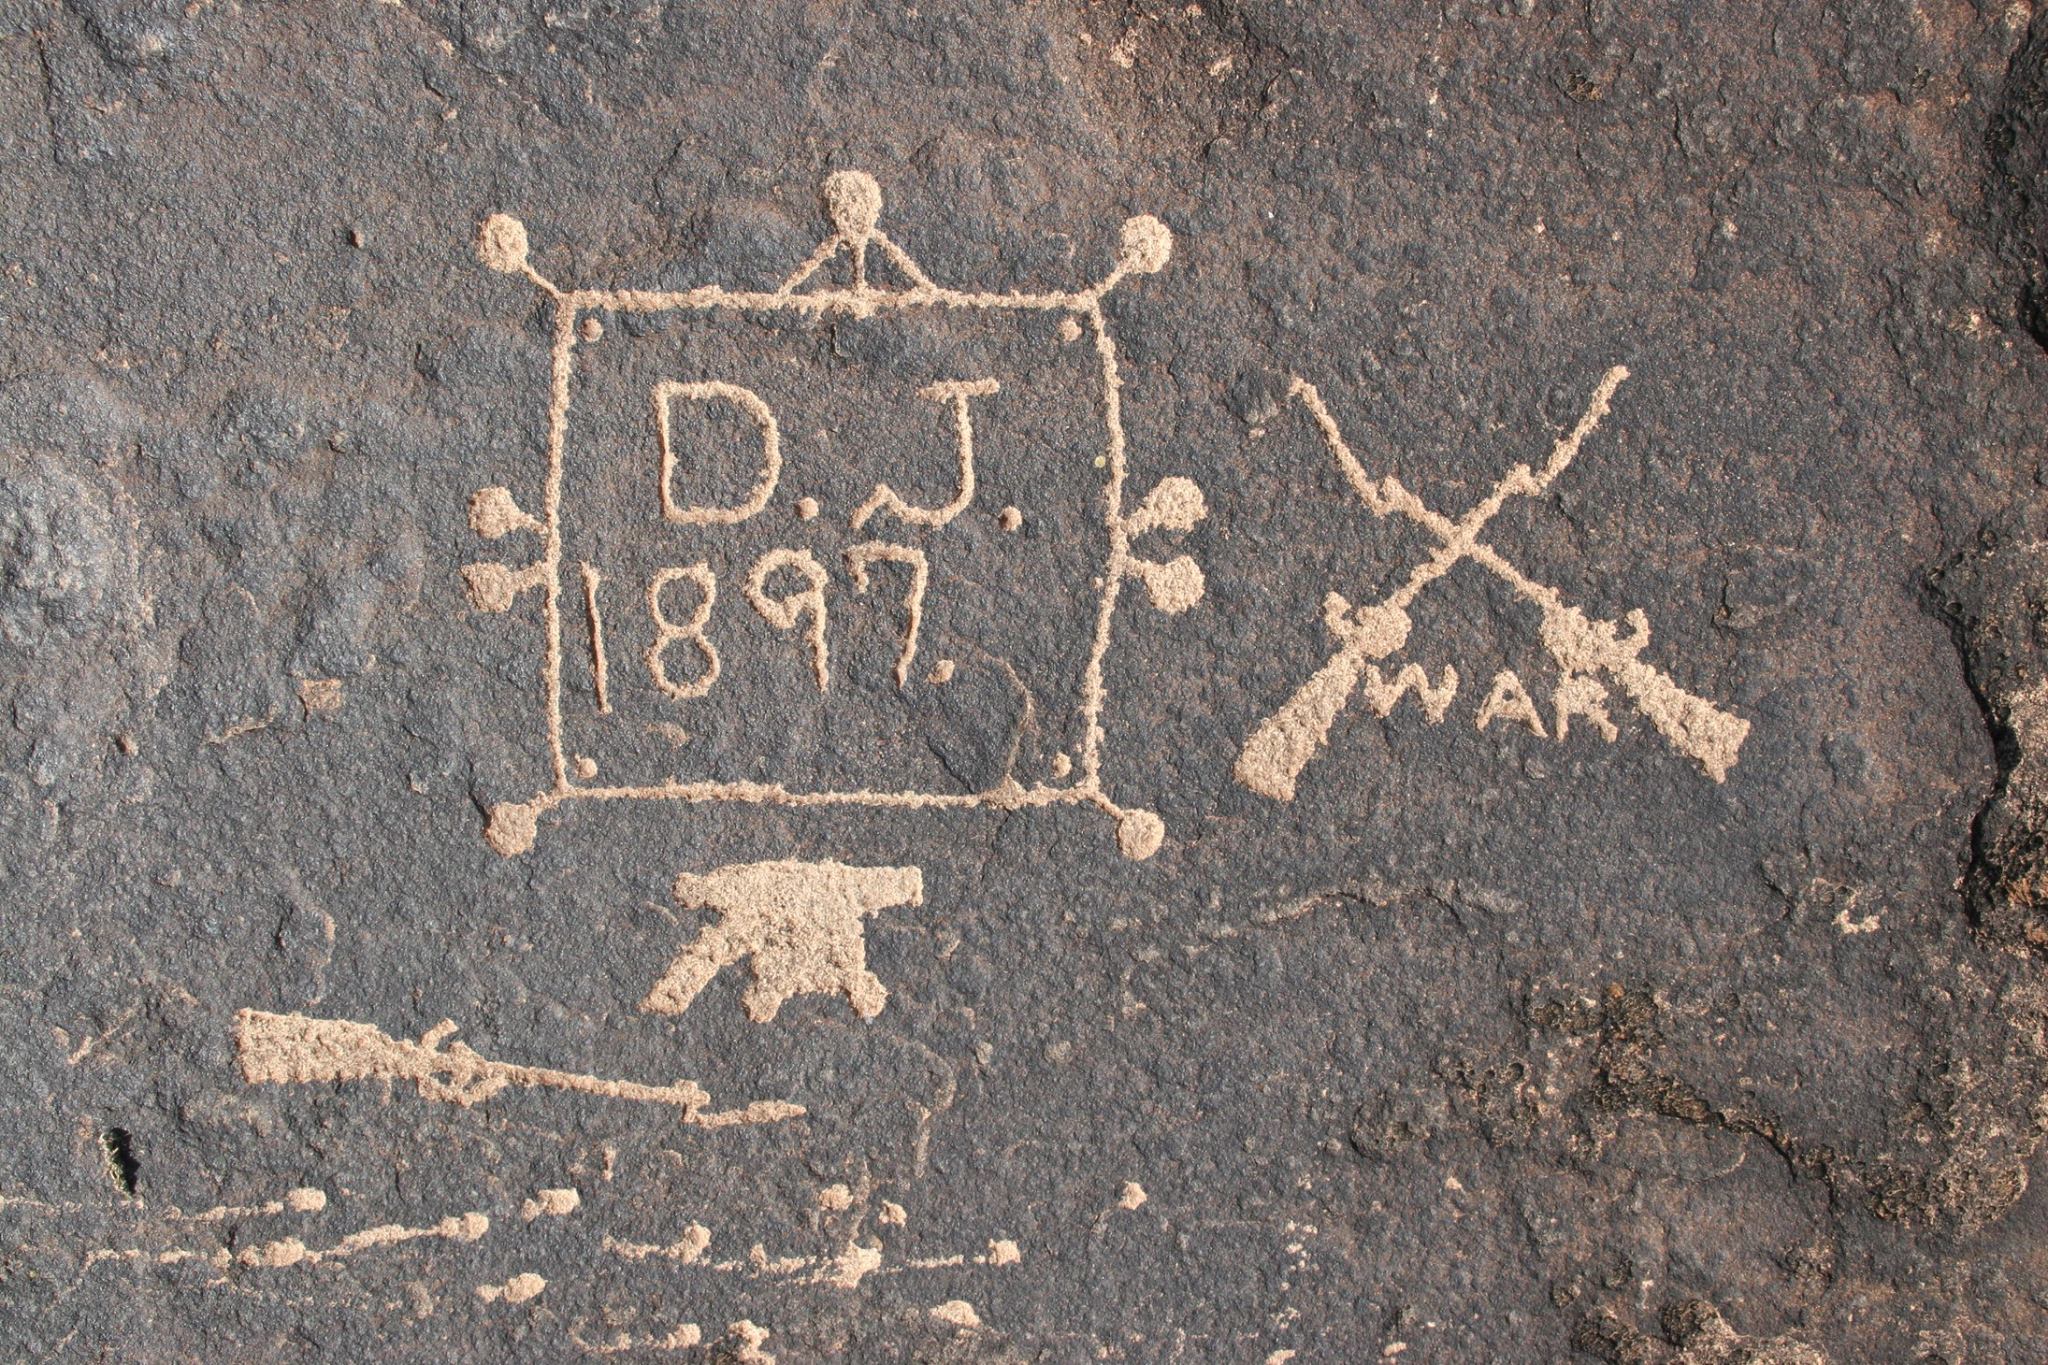 Pioneer (1897) petroglyph with various symbols of war